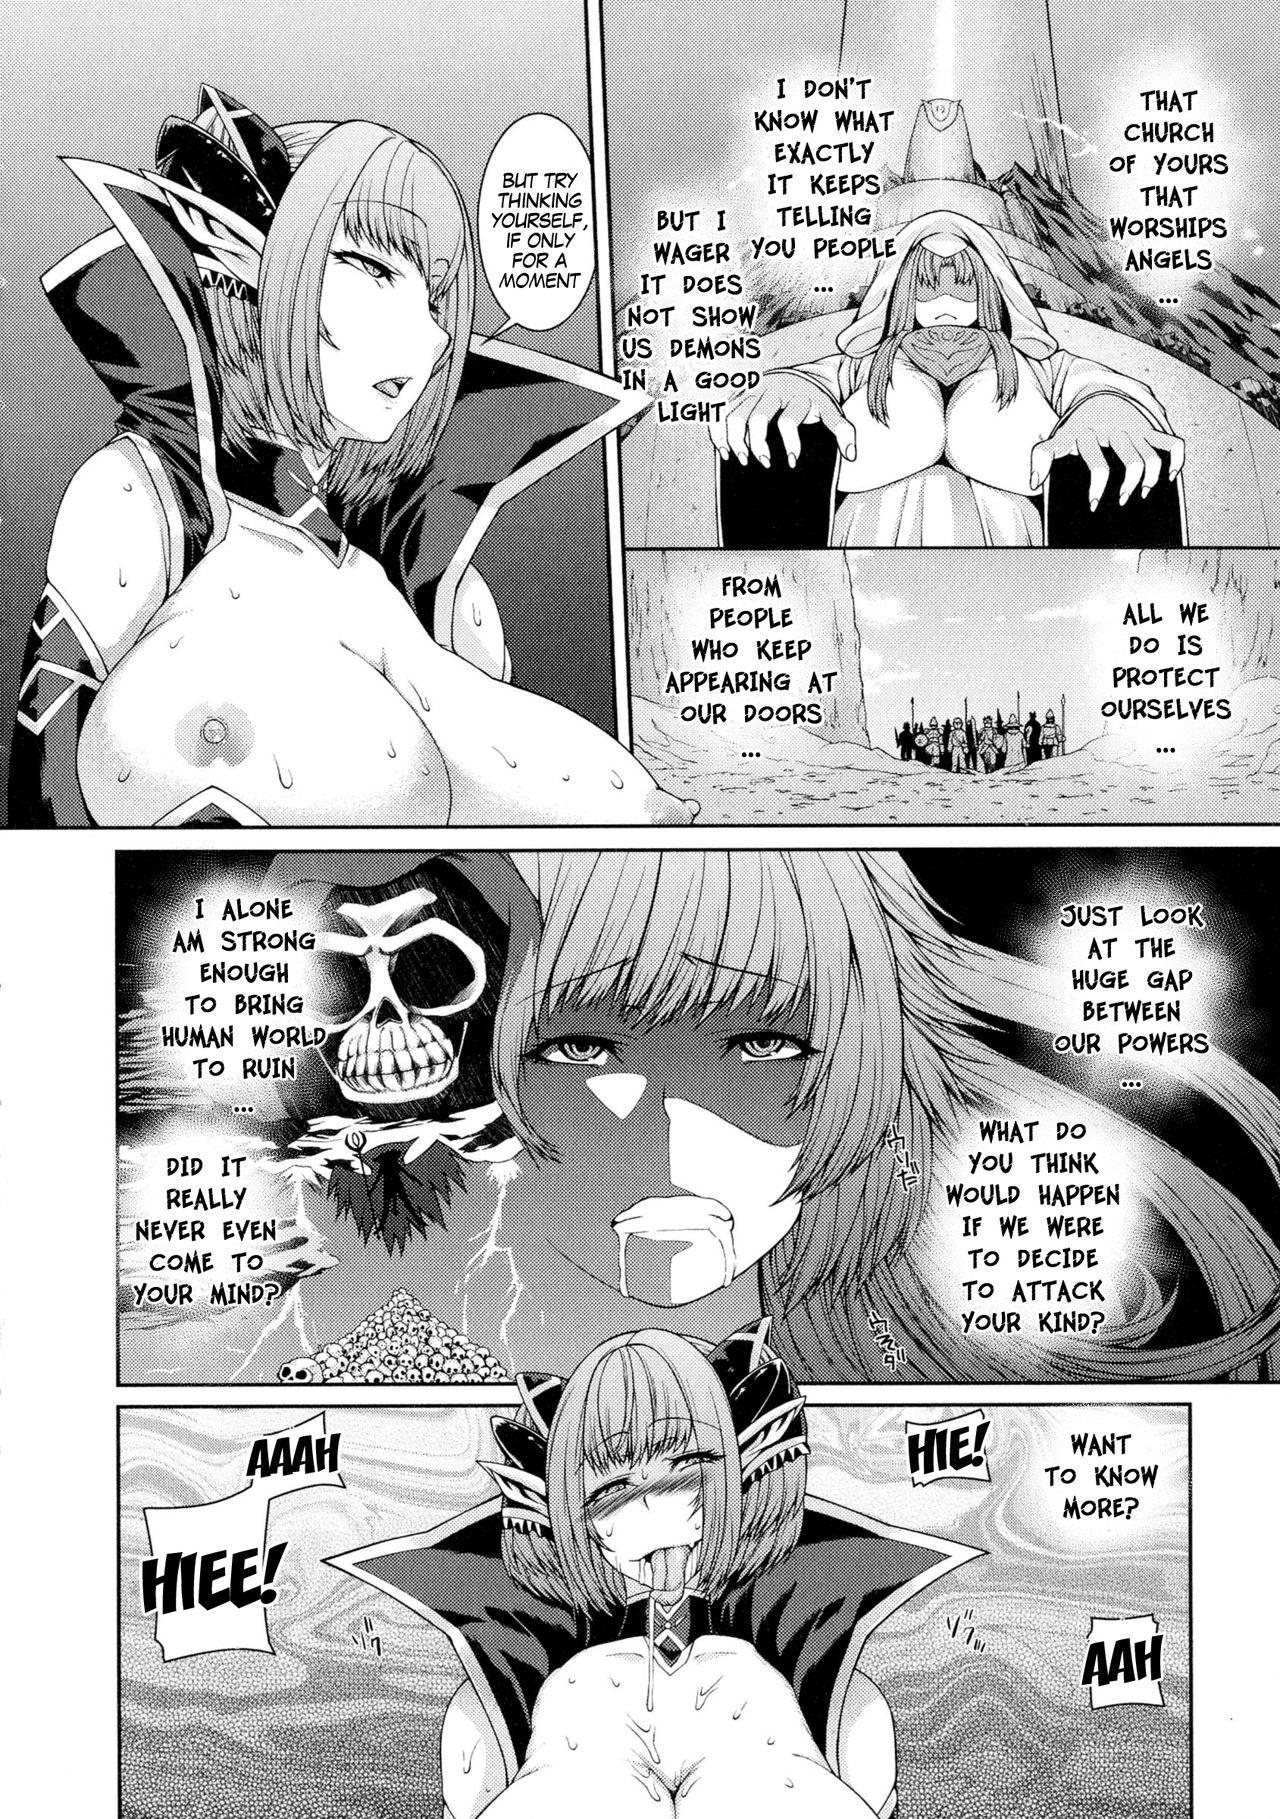 Chat Pandora's Box "Hero And The Demon Lord Of The North" Moneytalks - Page 12